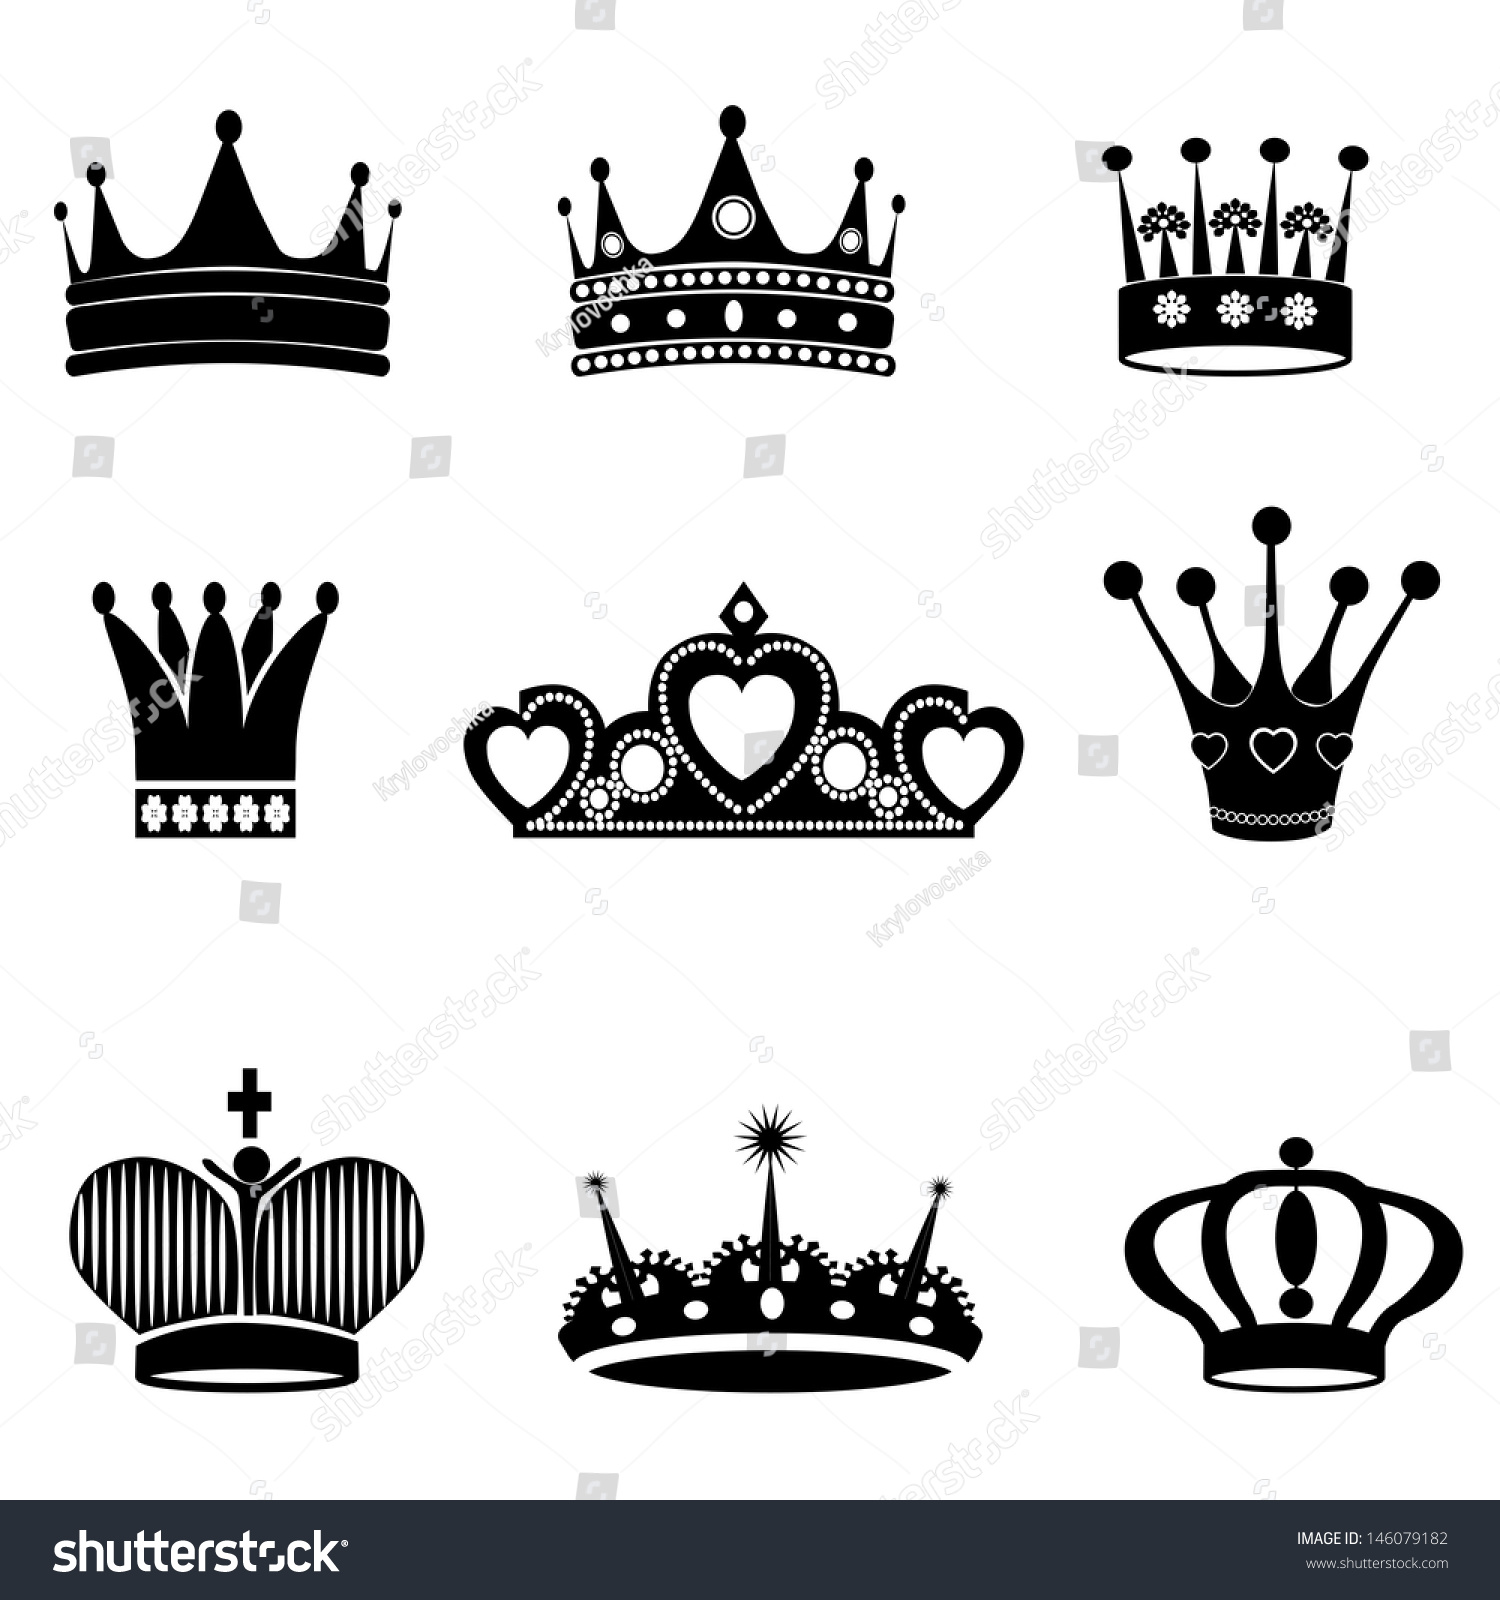 Vector Black Crown Icons Set On Stock Vector 146079182 - Shutterstock